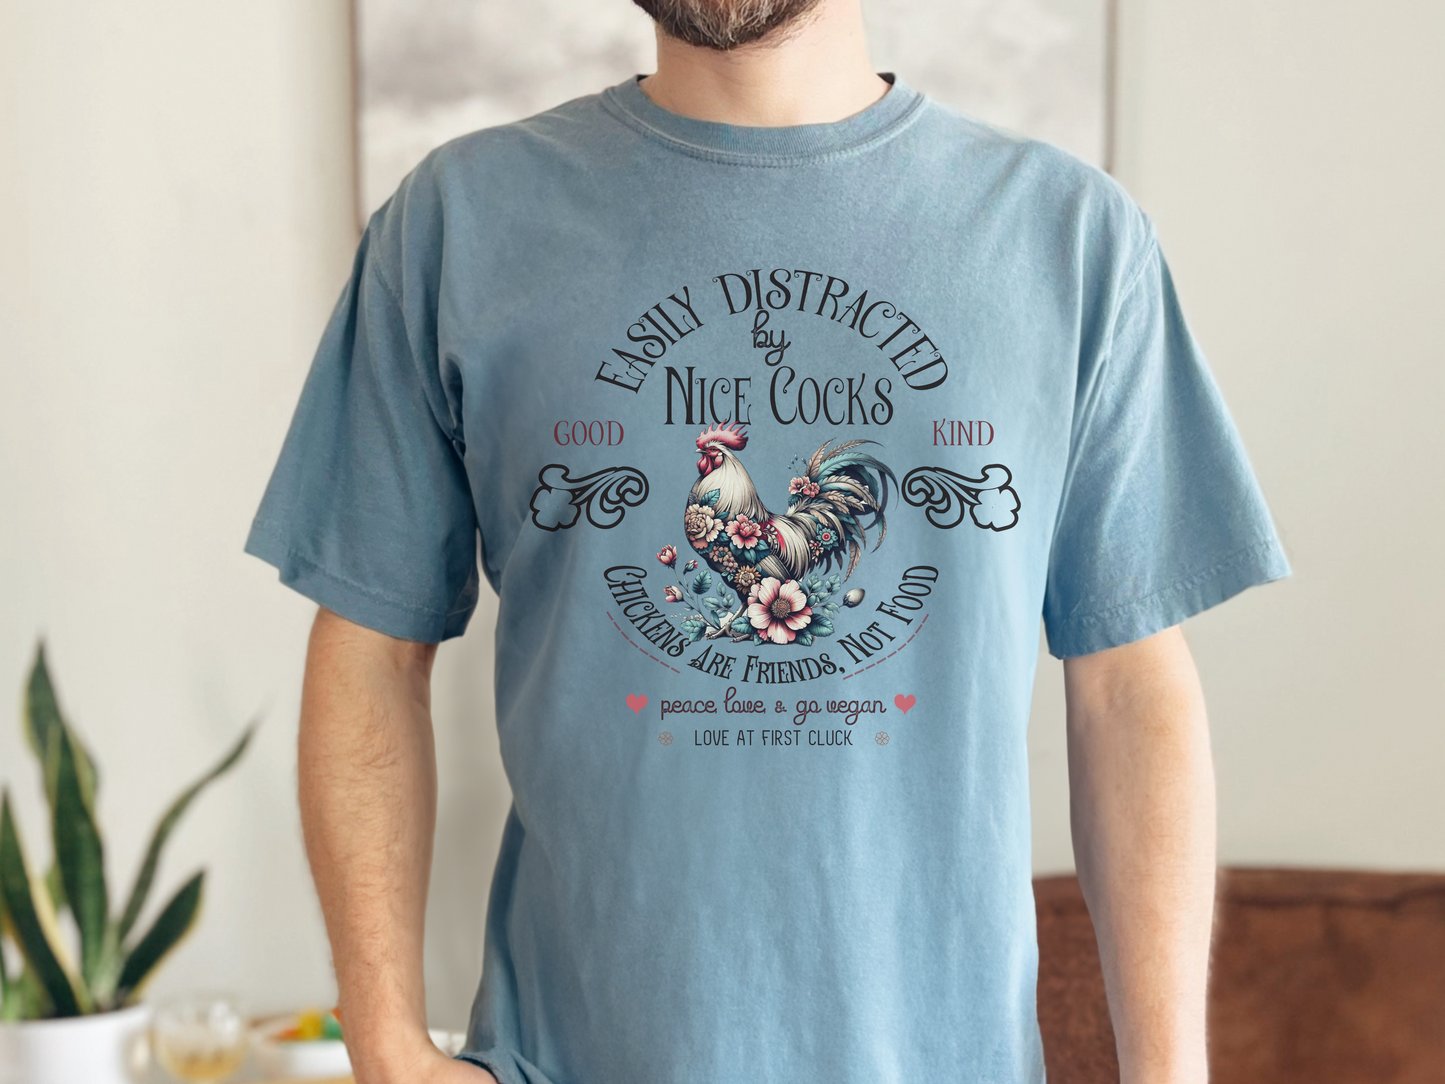 Easily Distracted by Nice Cocks Vegan T-Shirt {Unisex}